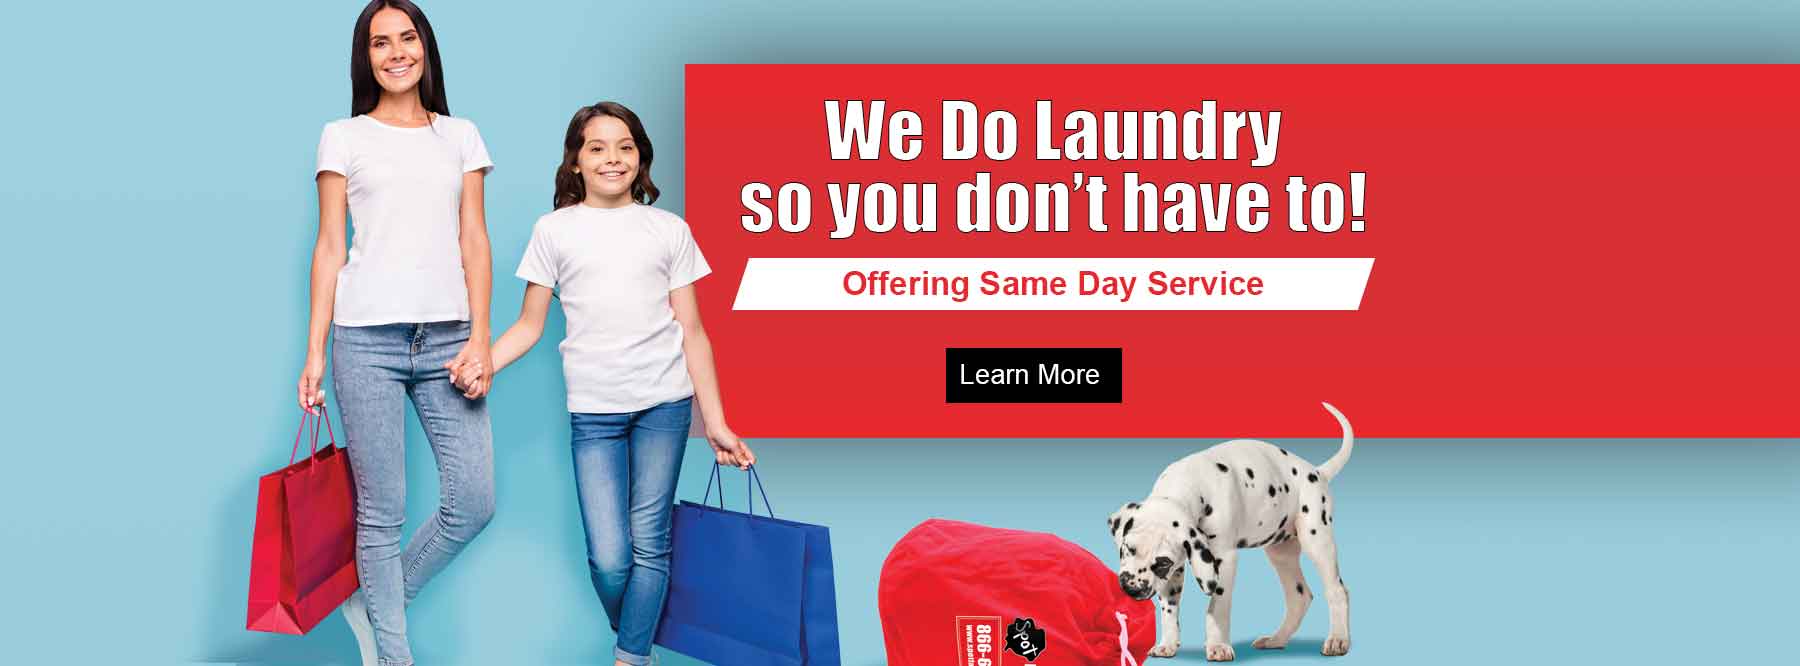 We do laundry so you don't have to. Try our laundry service today. Click to learn more